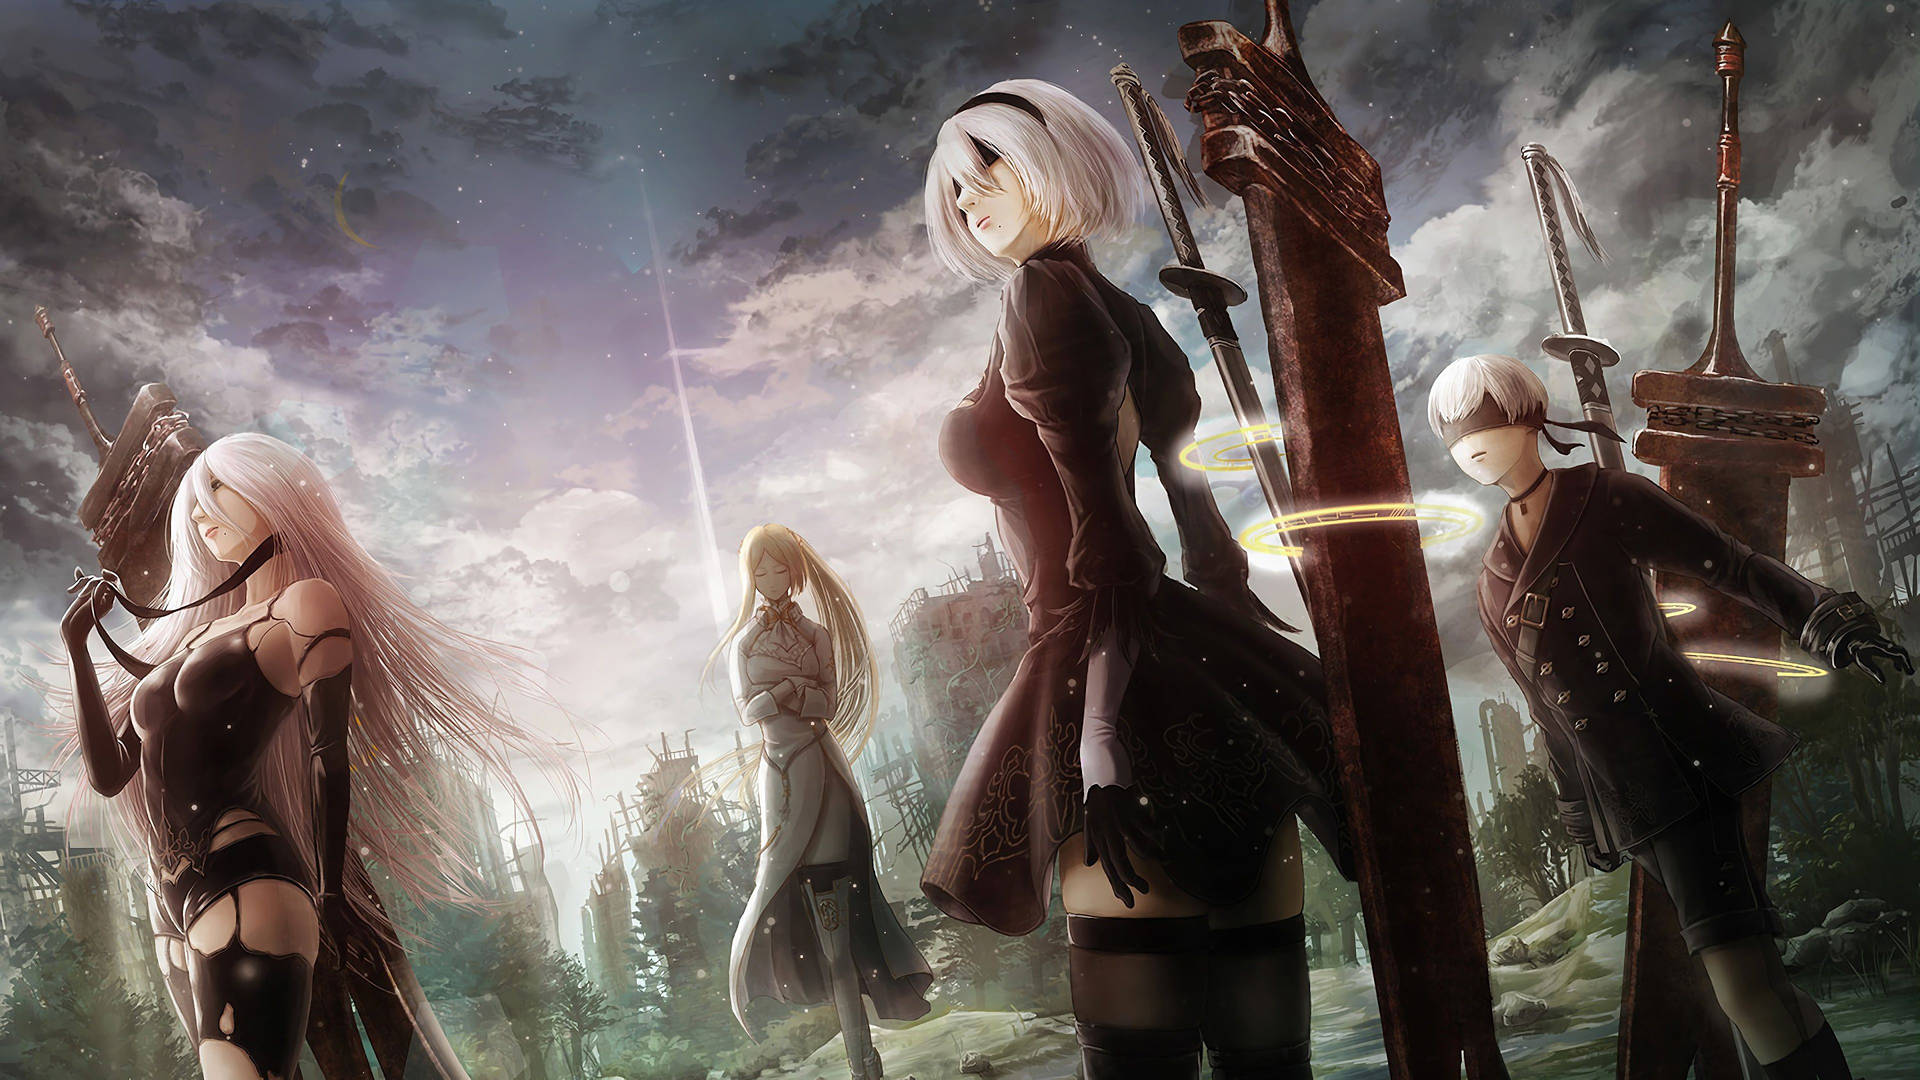 Nier Automata 2b, 9s, A2 And The Commander